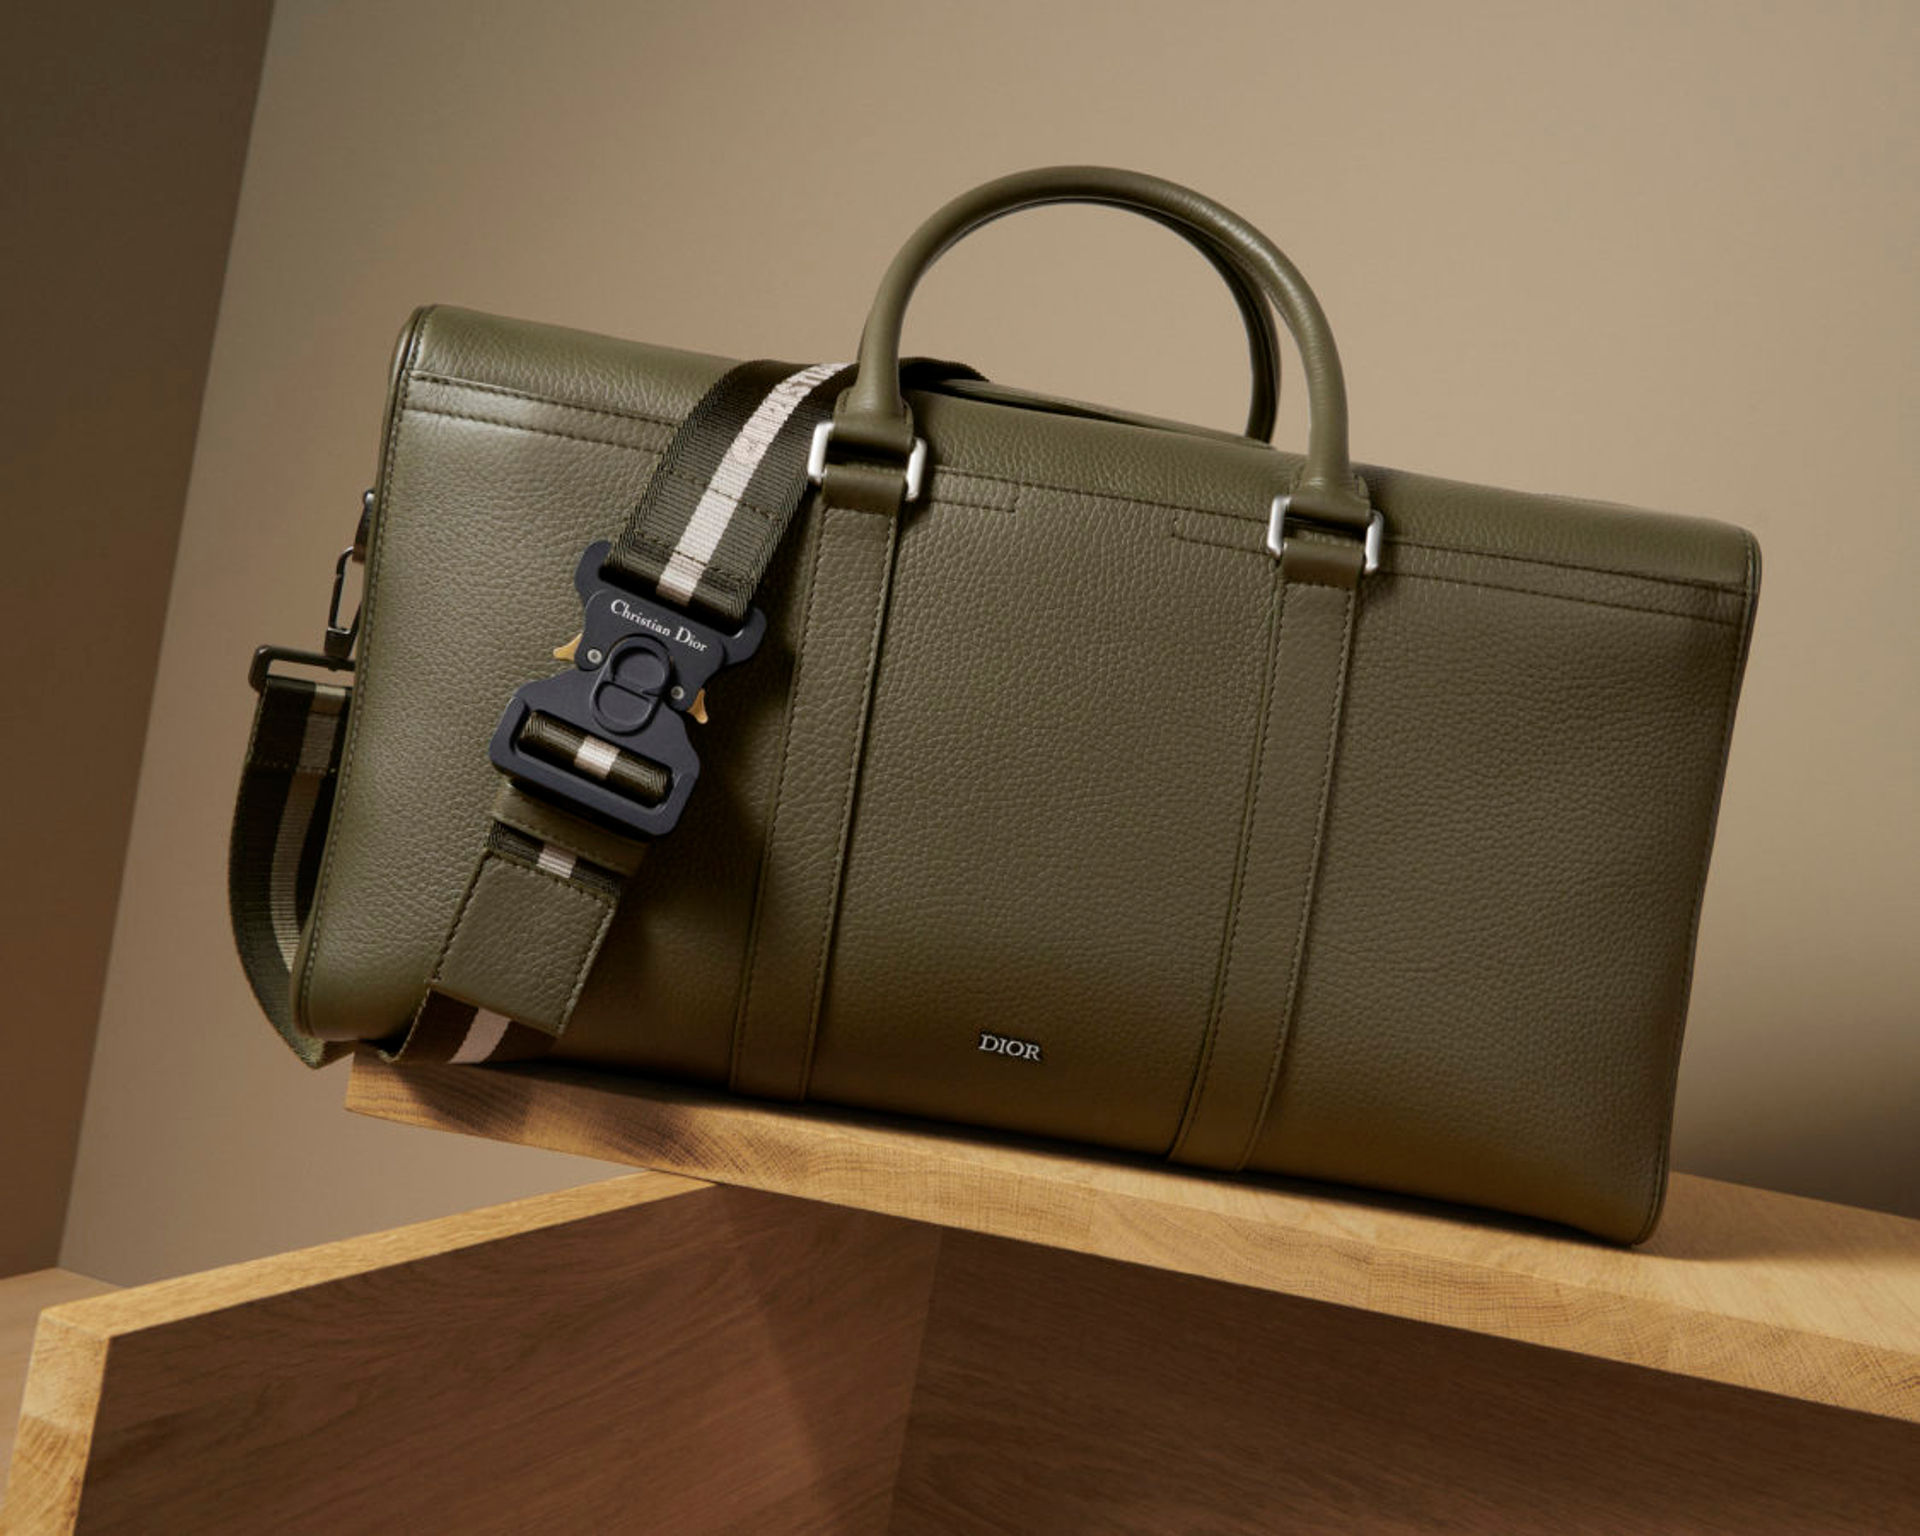 Dior's new Lingot Bag is a travel essential for your next holiday